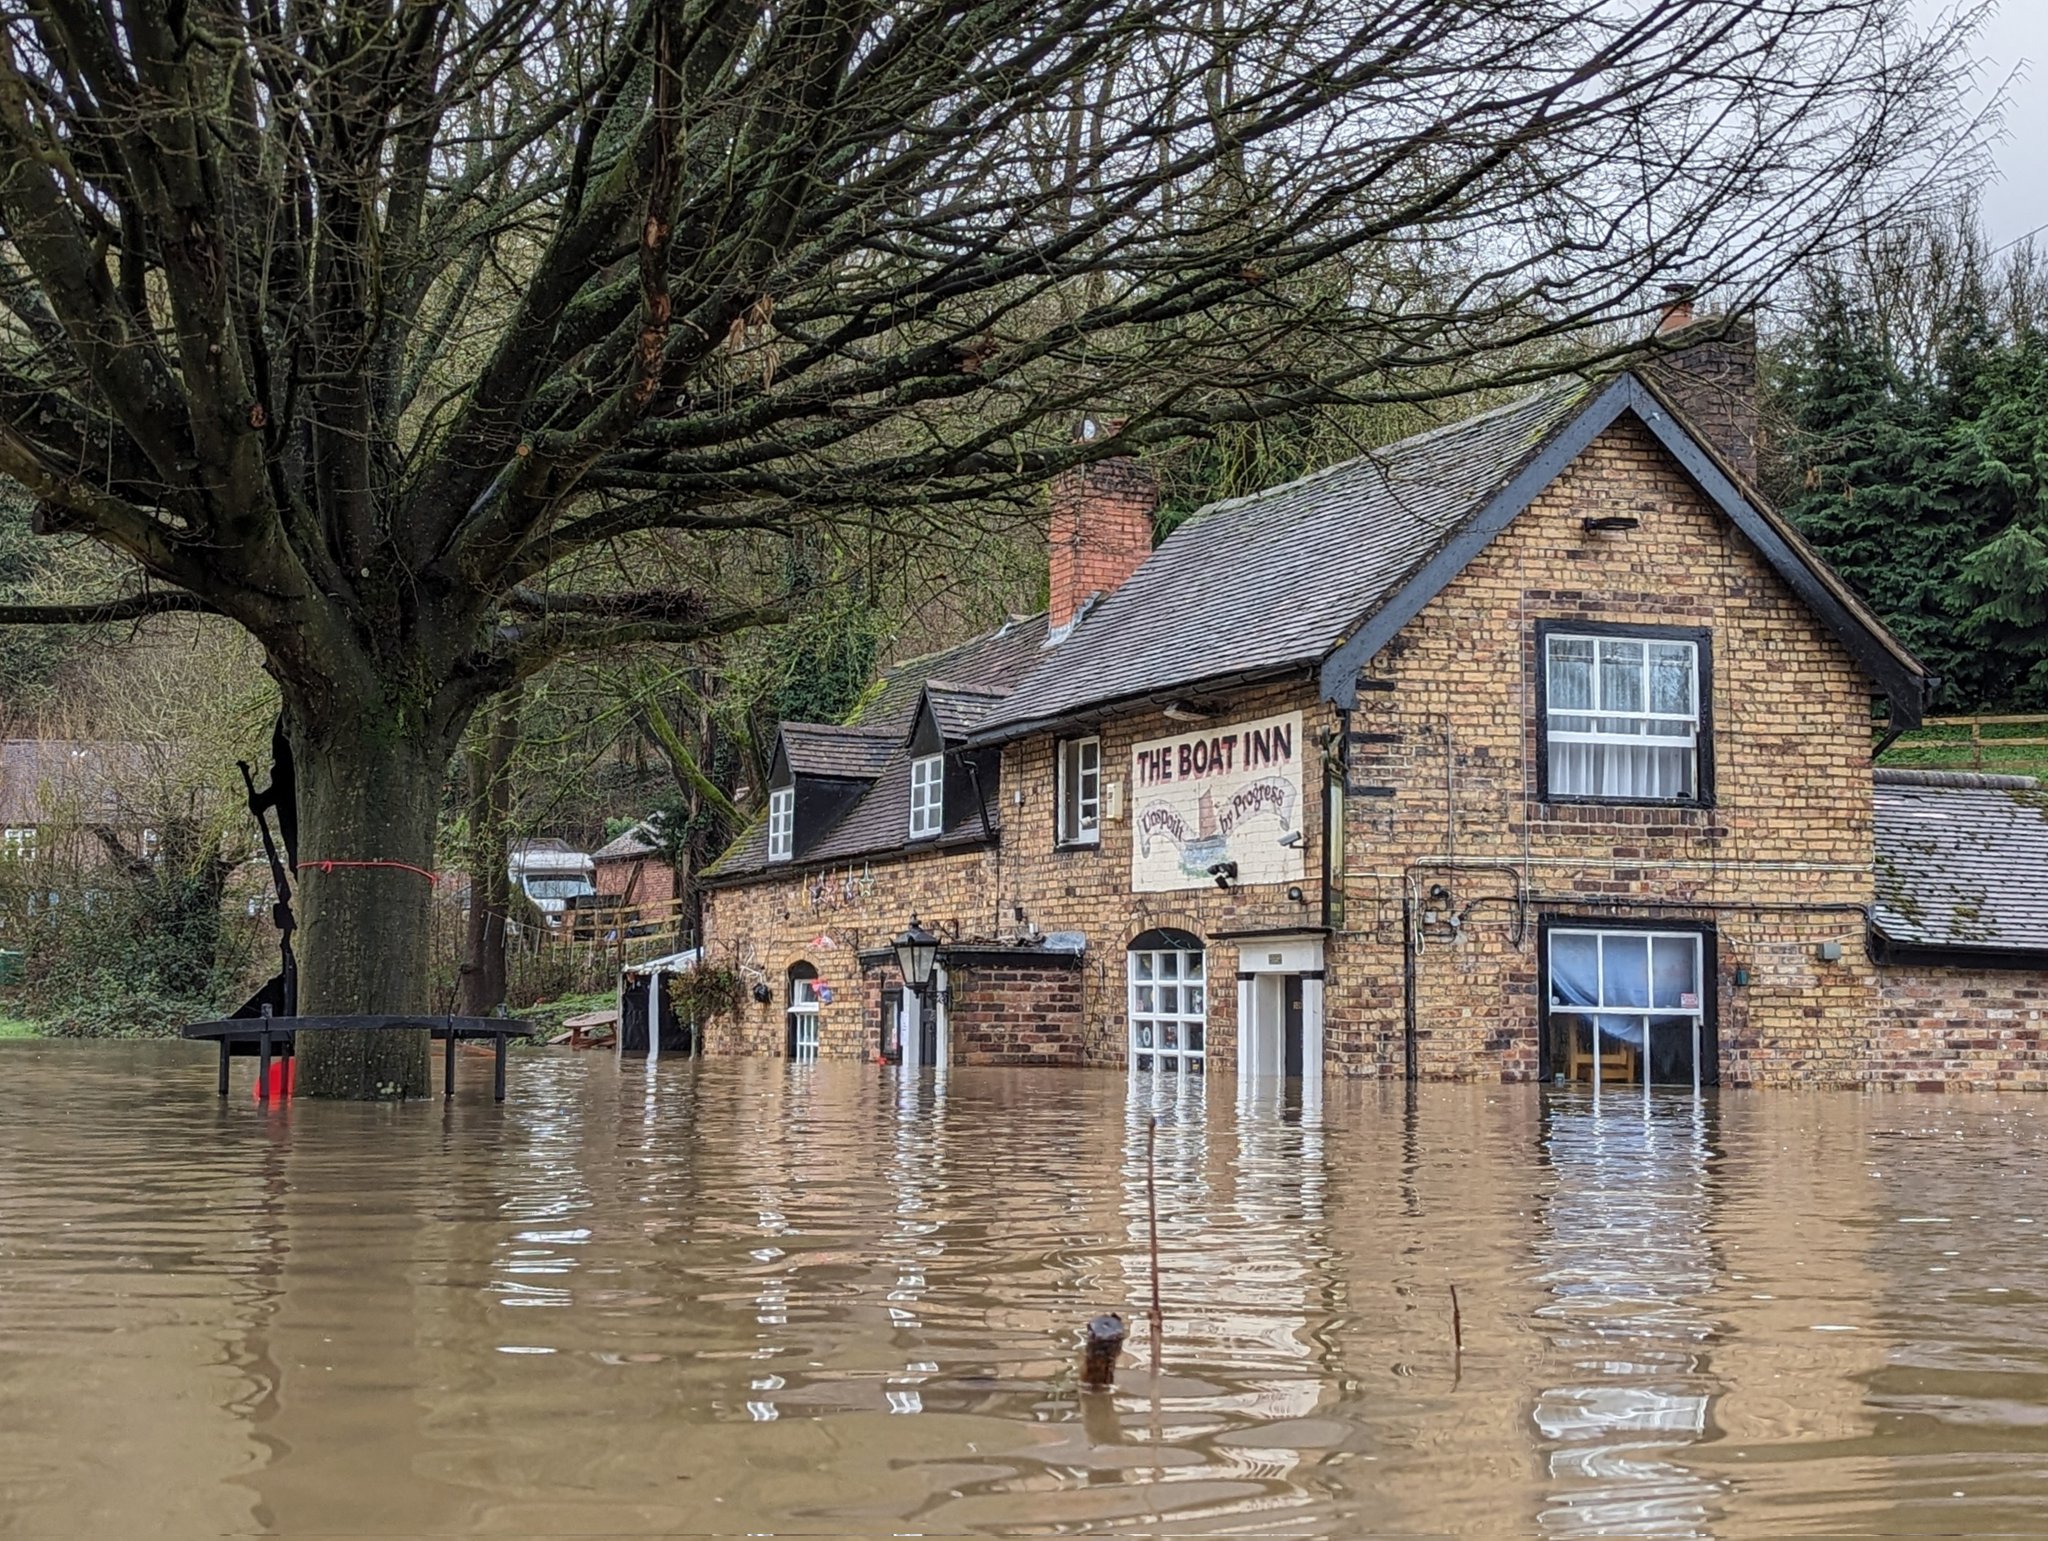 A view of the pub from outside with heavy flooding